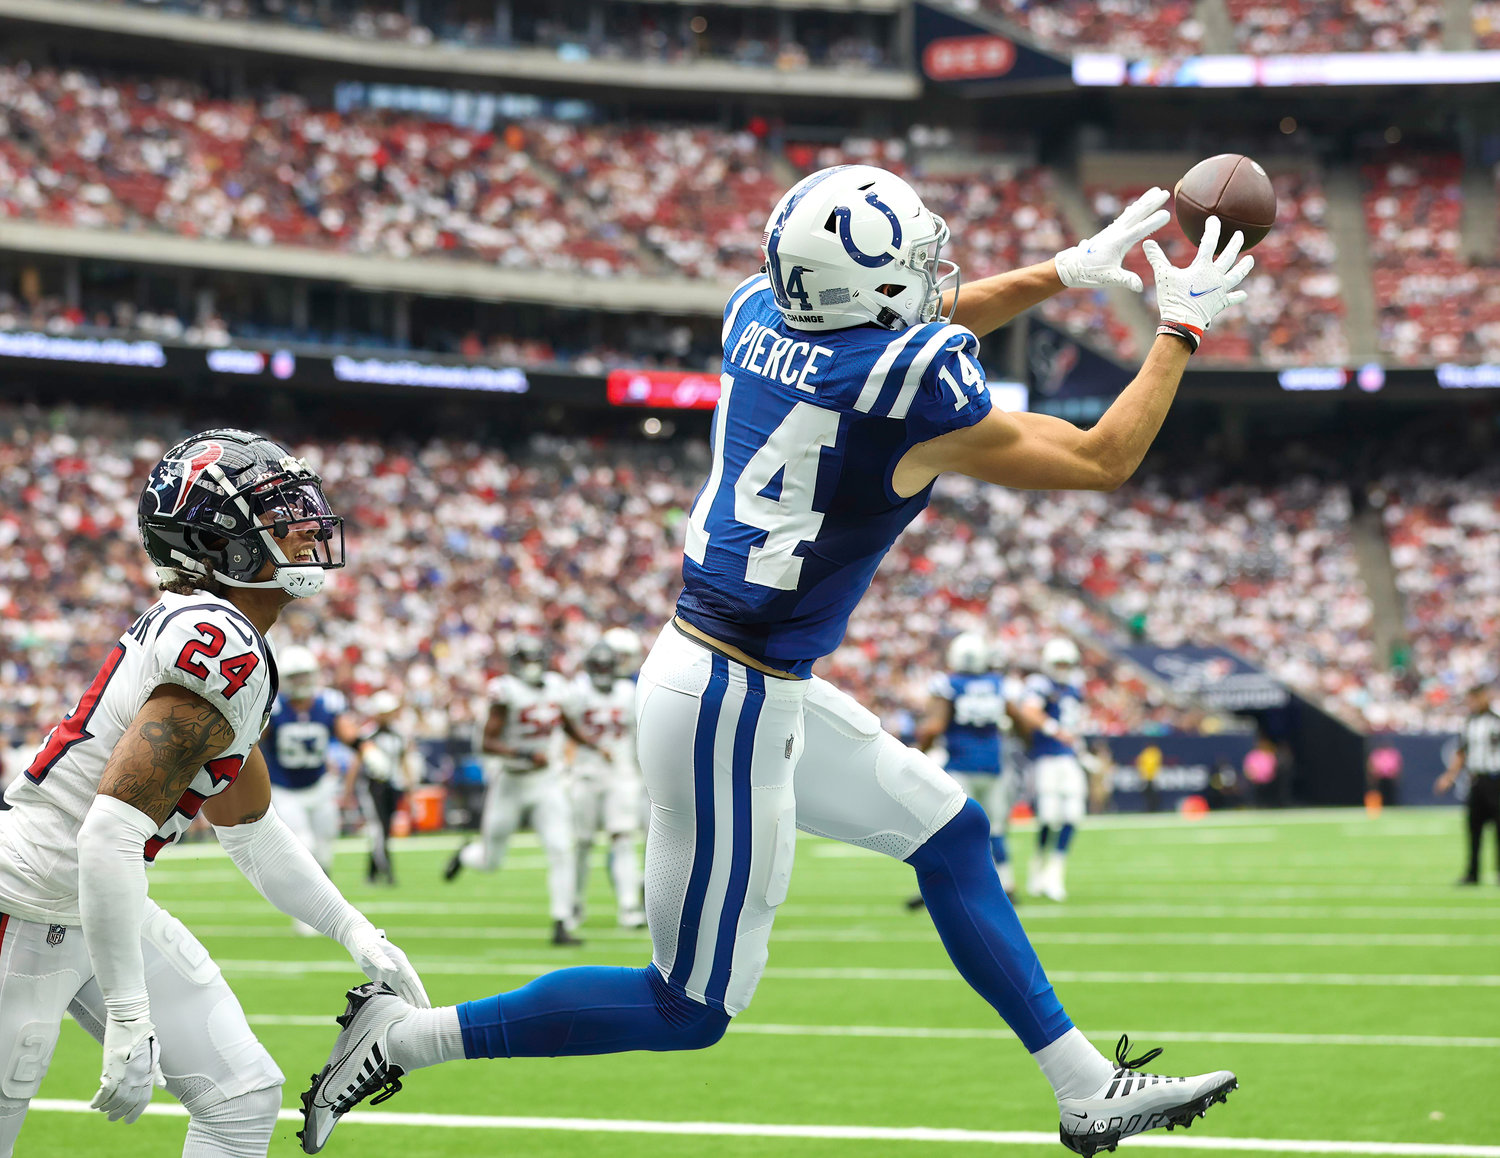 Indianapolis Colts wide receiver Alec Pierce (14) drops a would-be touchdown pass in the end zone during an NFL game between the Texans and the Colts on September 11, 2022 in Houston. The game ended in a 20-20 tie after a scoreless overtime period.